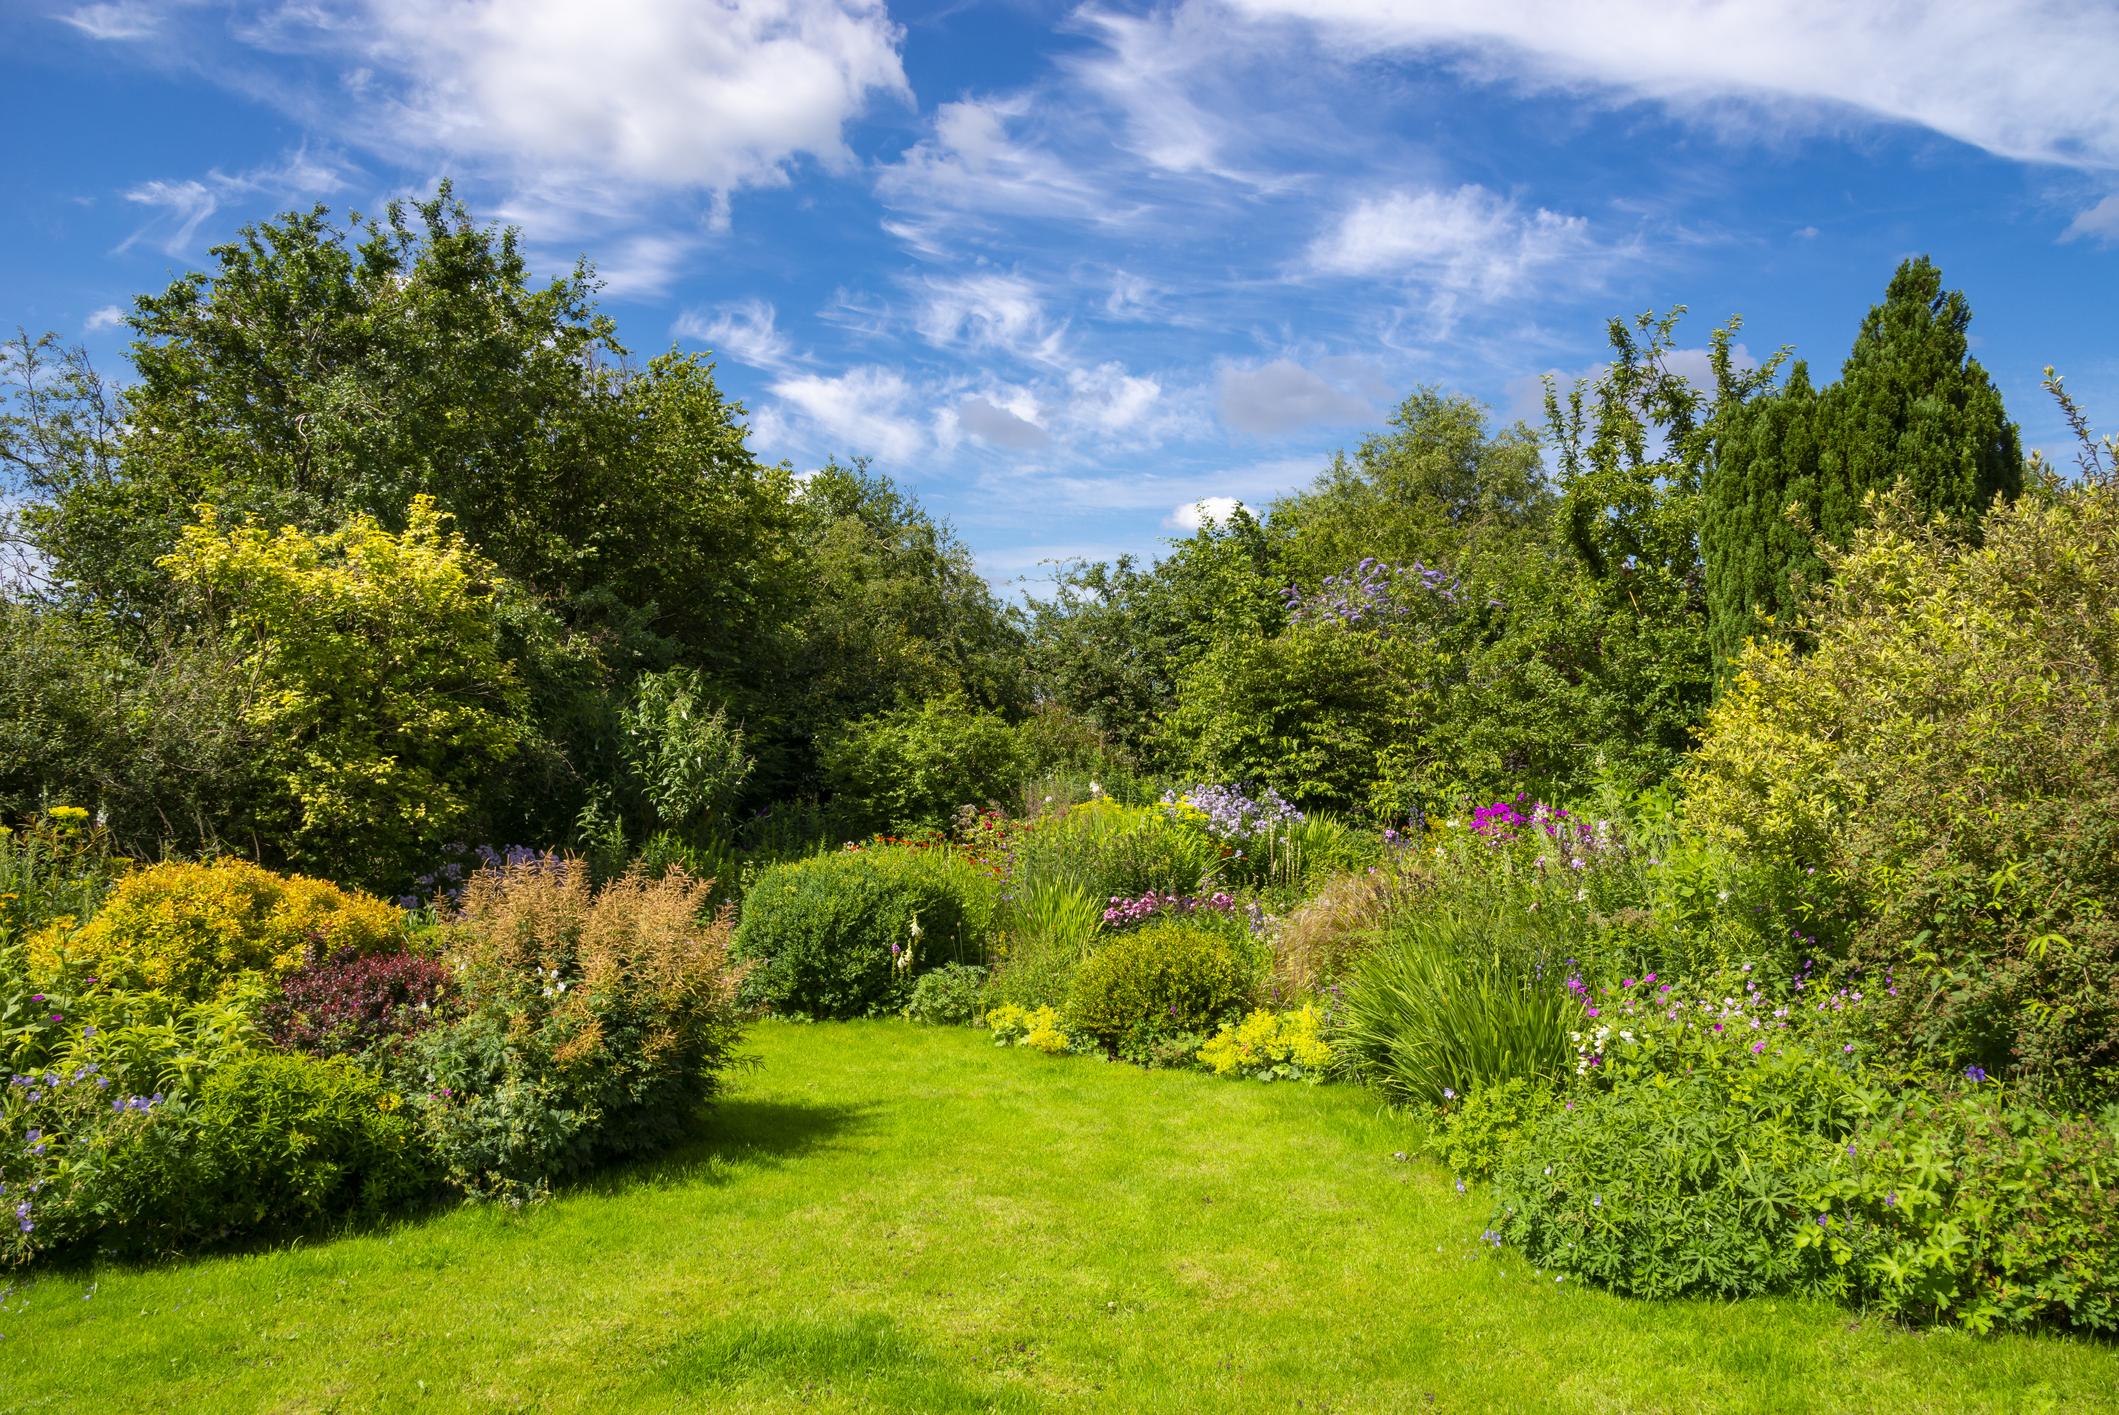  A garden in the sunshine with shrubs, flowers and trees 